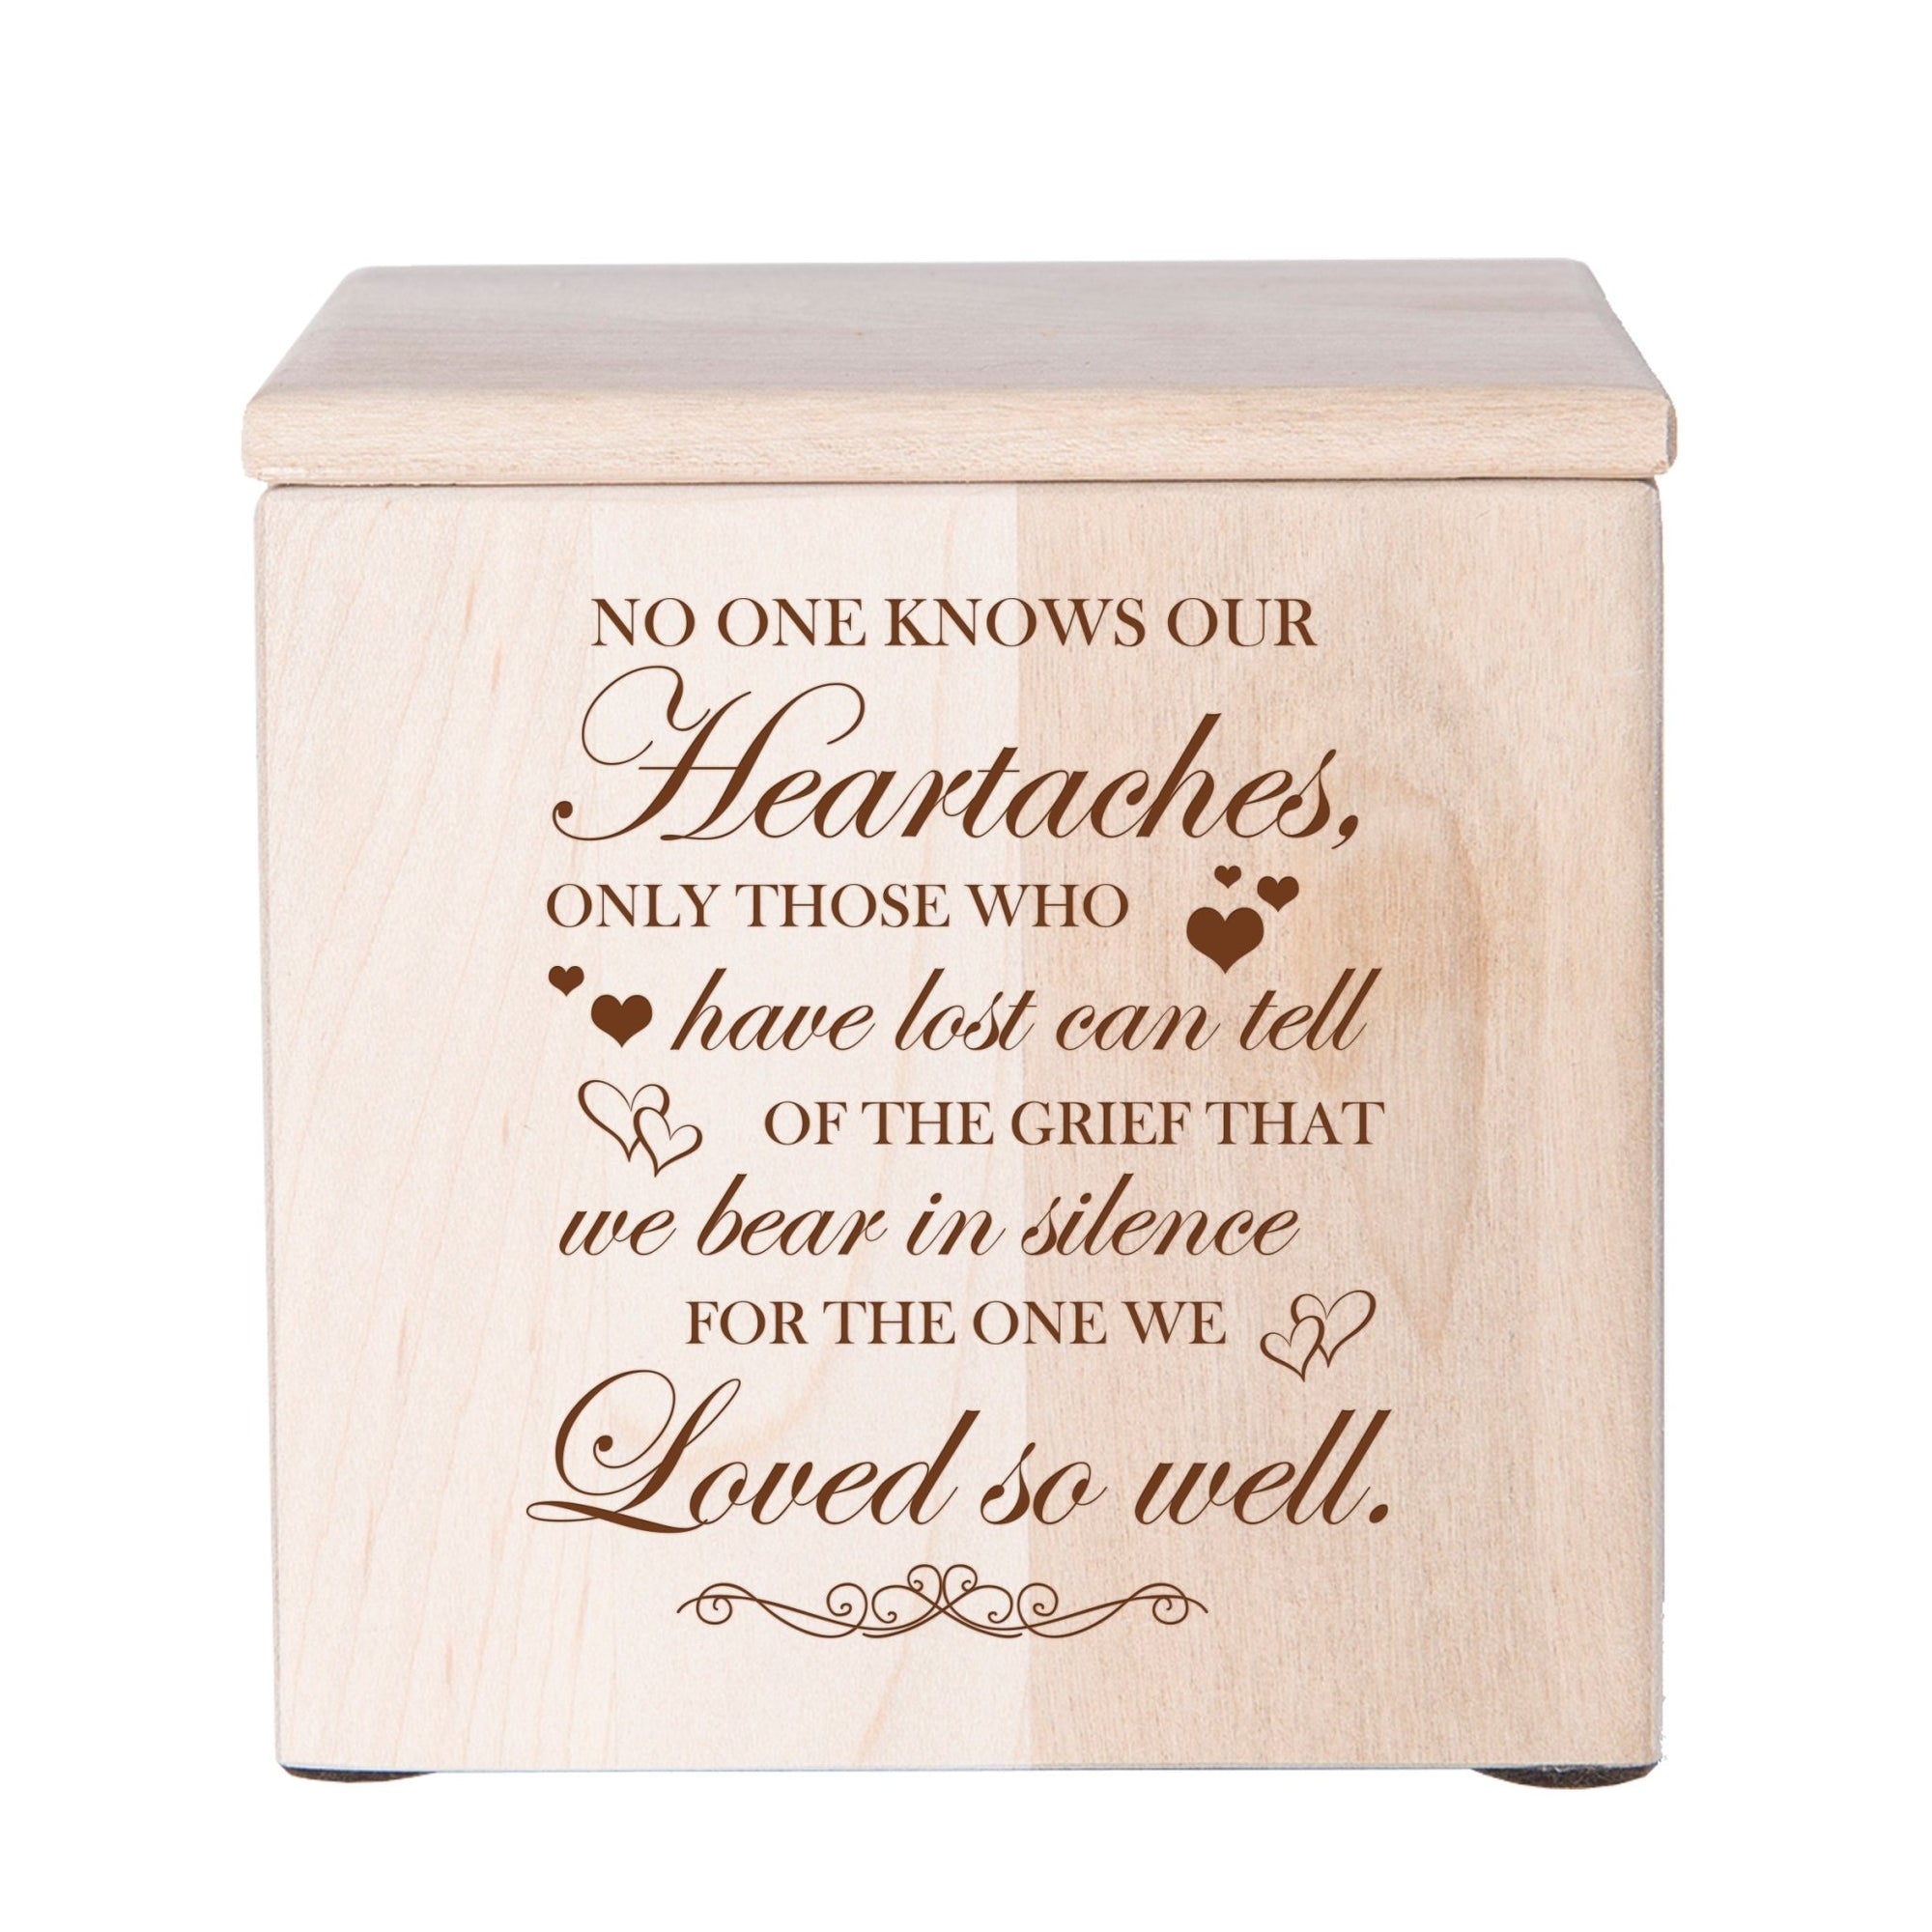 Pet Memorial Keepsake Cremation Urn Box for Dog or Cat - No One Knows Our Heartaches - LifeSong Milestones